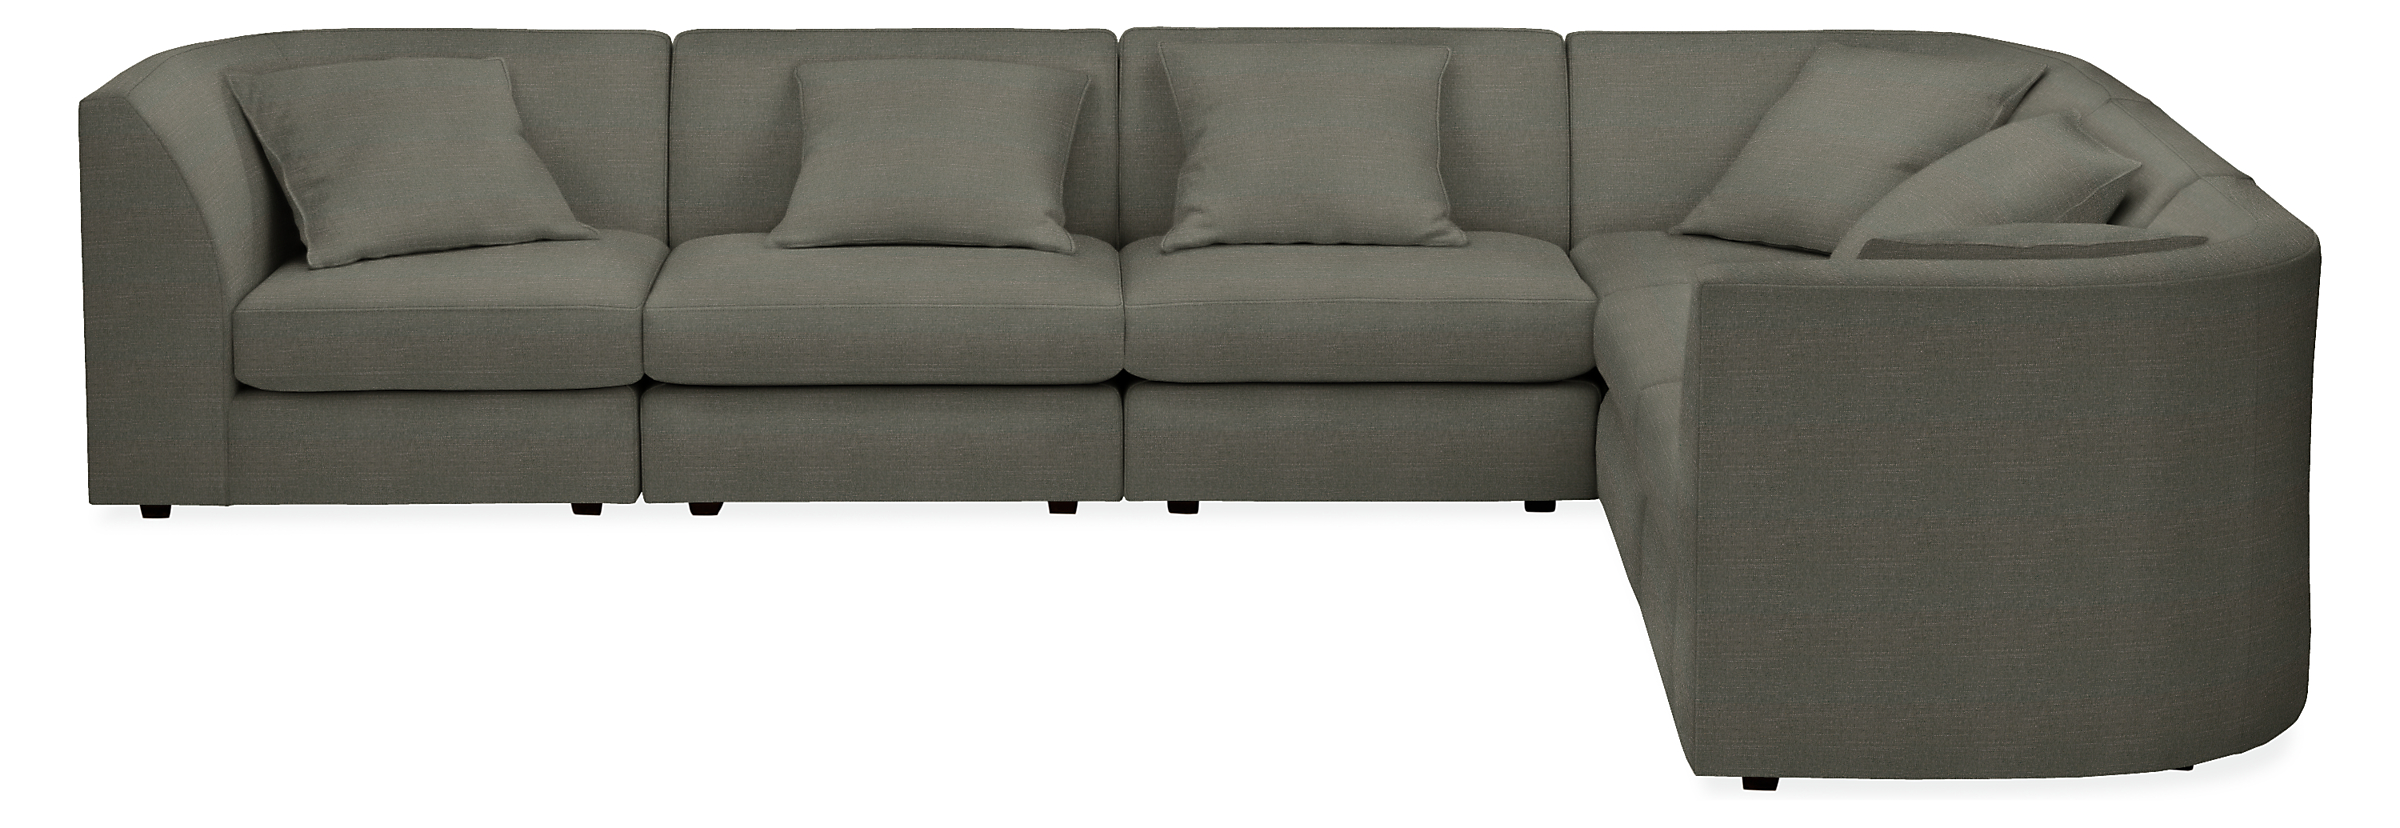 Astaire Modular Sectionals